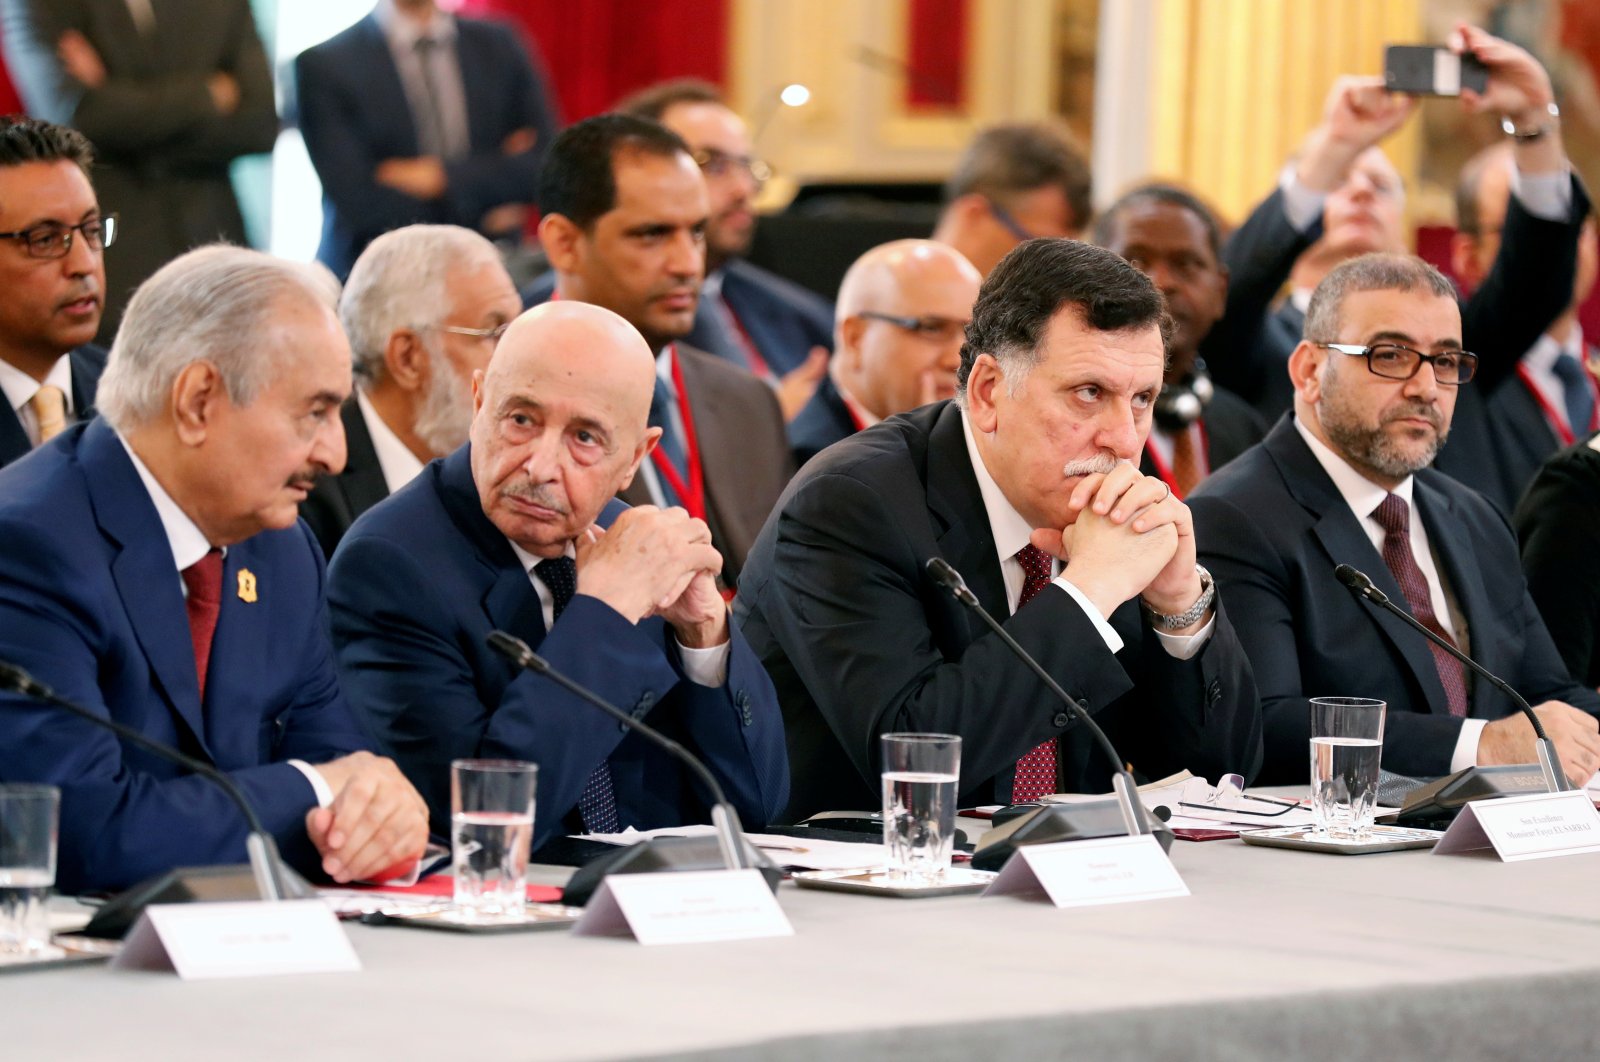 From left to right, putschist Gen. Khalifa Haftar, Aguila Saleh Issa, president of the eastern Libyan House of Representatives, Libyan Prime Minister Fayez Sarraj and Khaled al-Mishri, president of Libya High Council of State, during an international conference on Libya at the Elysee Palace in Paris, France, May 29, 2018. (Reuters Photo)